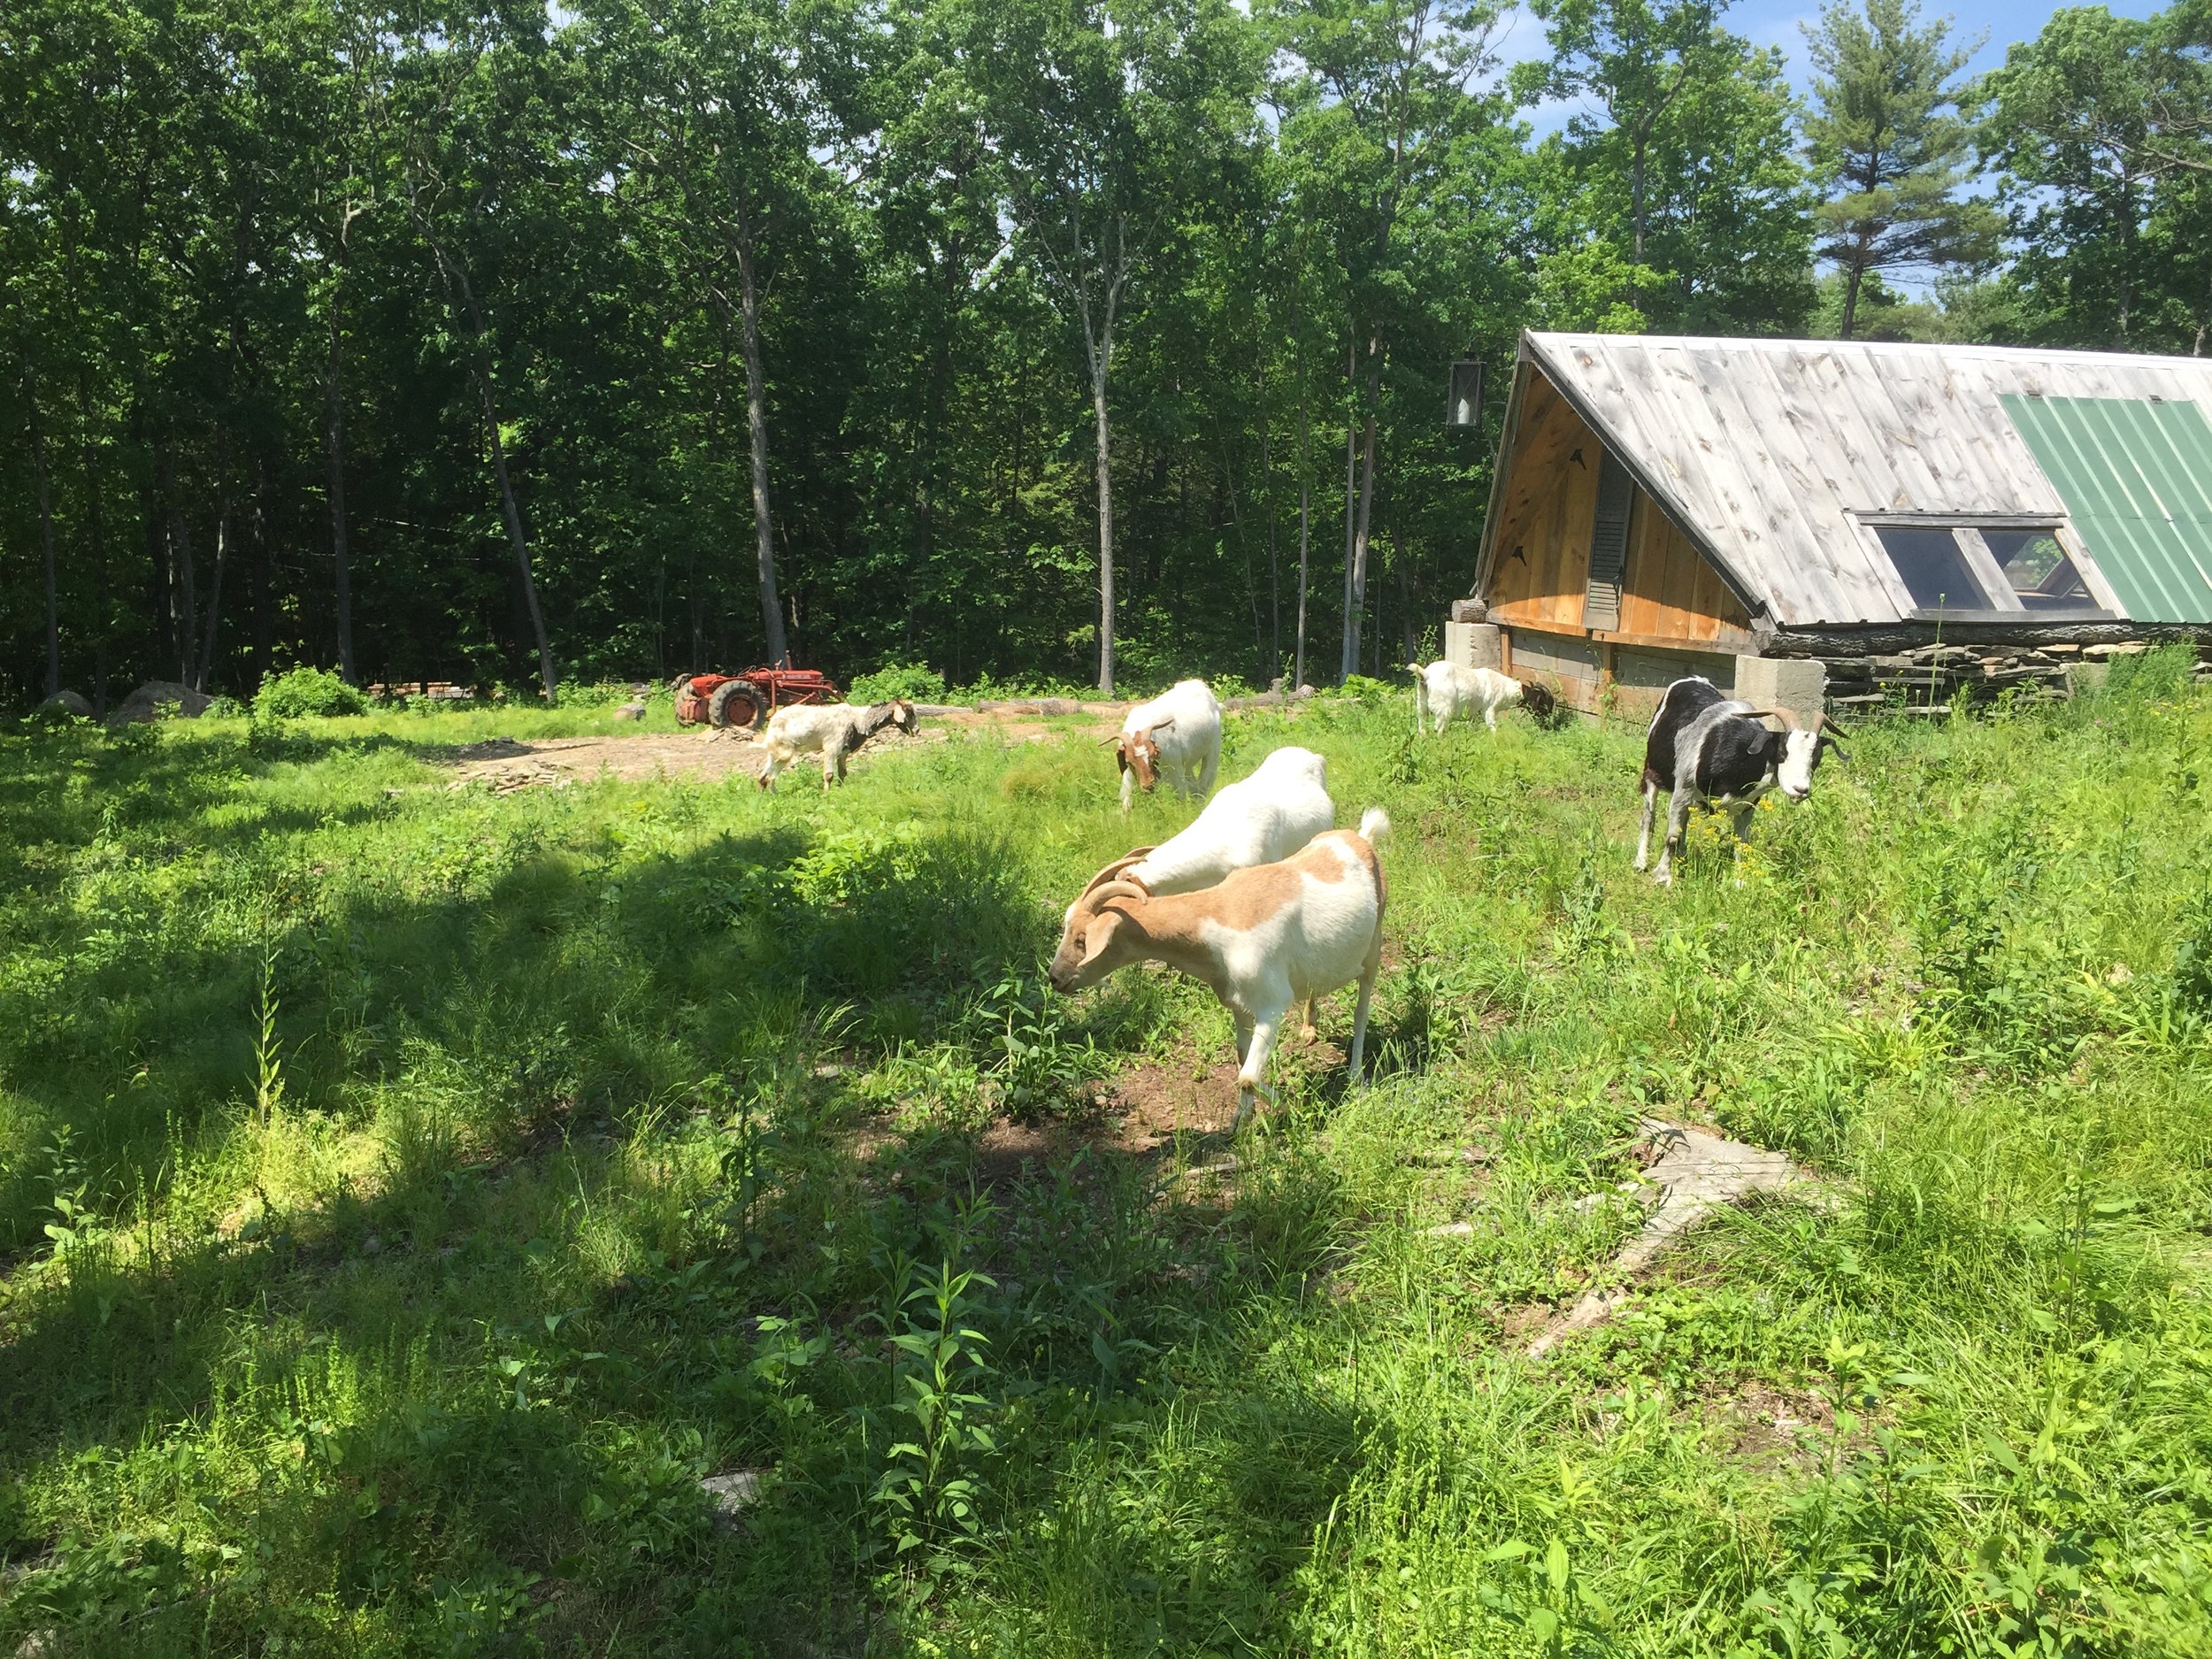   Goats foraging in the woods eliminate invasive weeds and open the tree canopy  